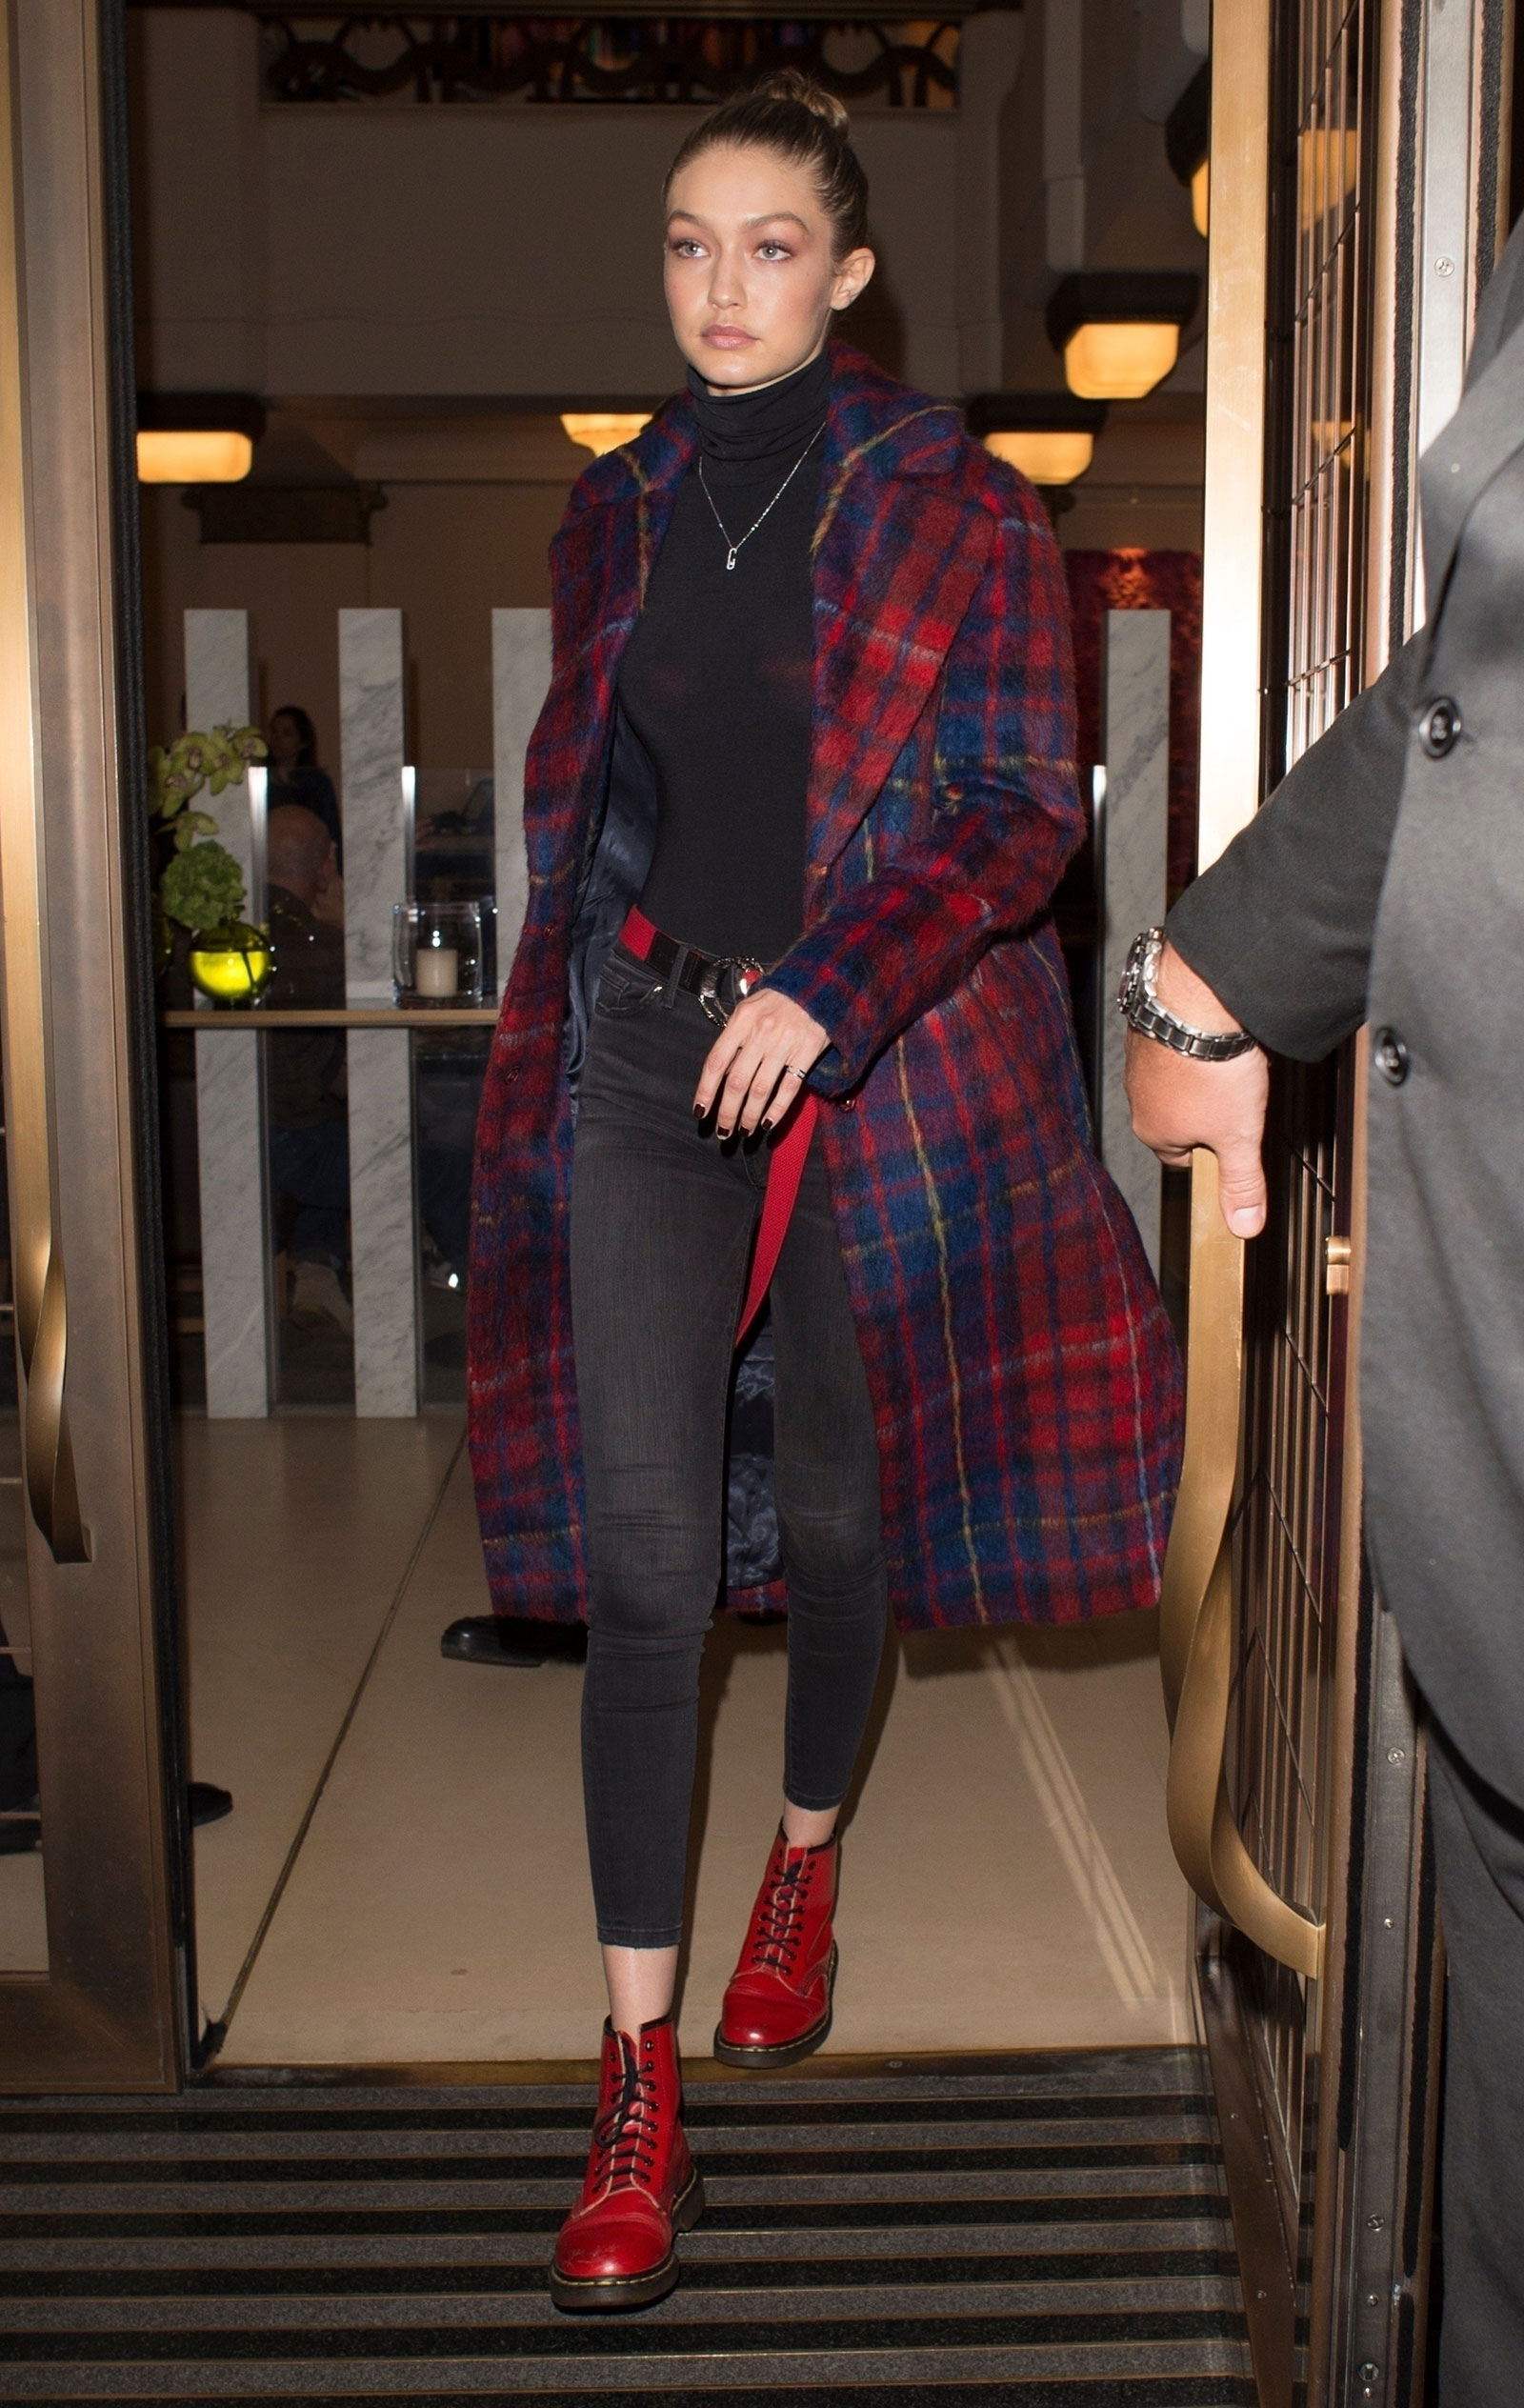 Gigi Hadid steps out in a plaid coat, black turtleneck and red combat boots.